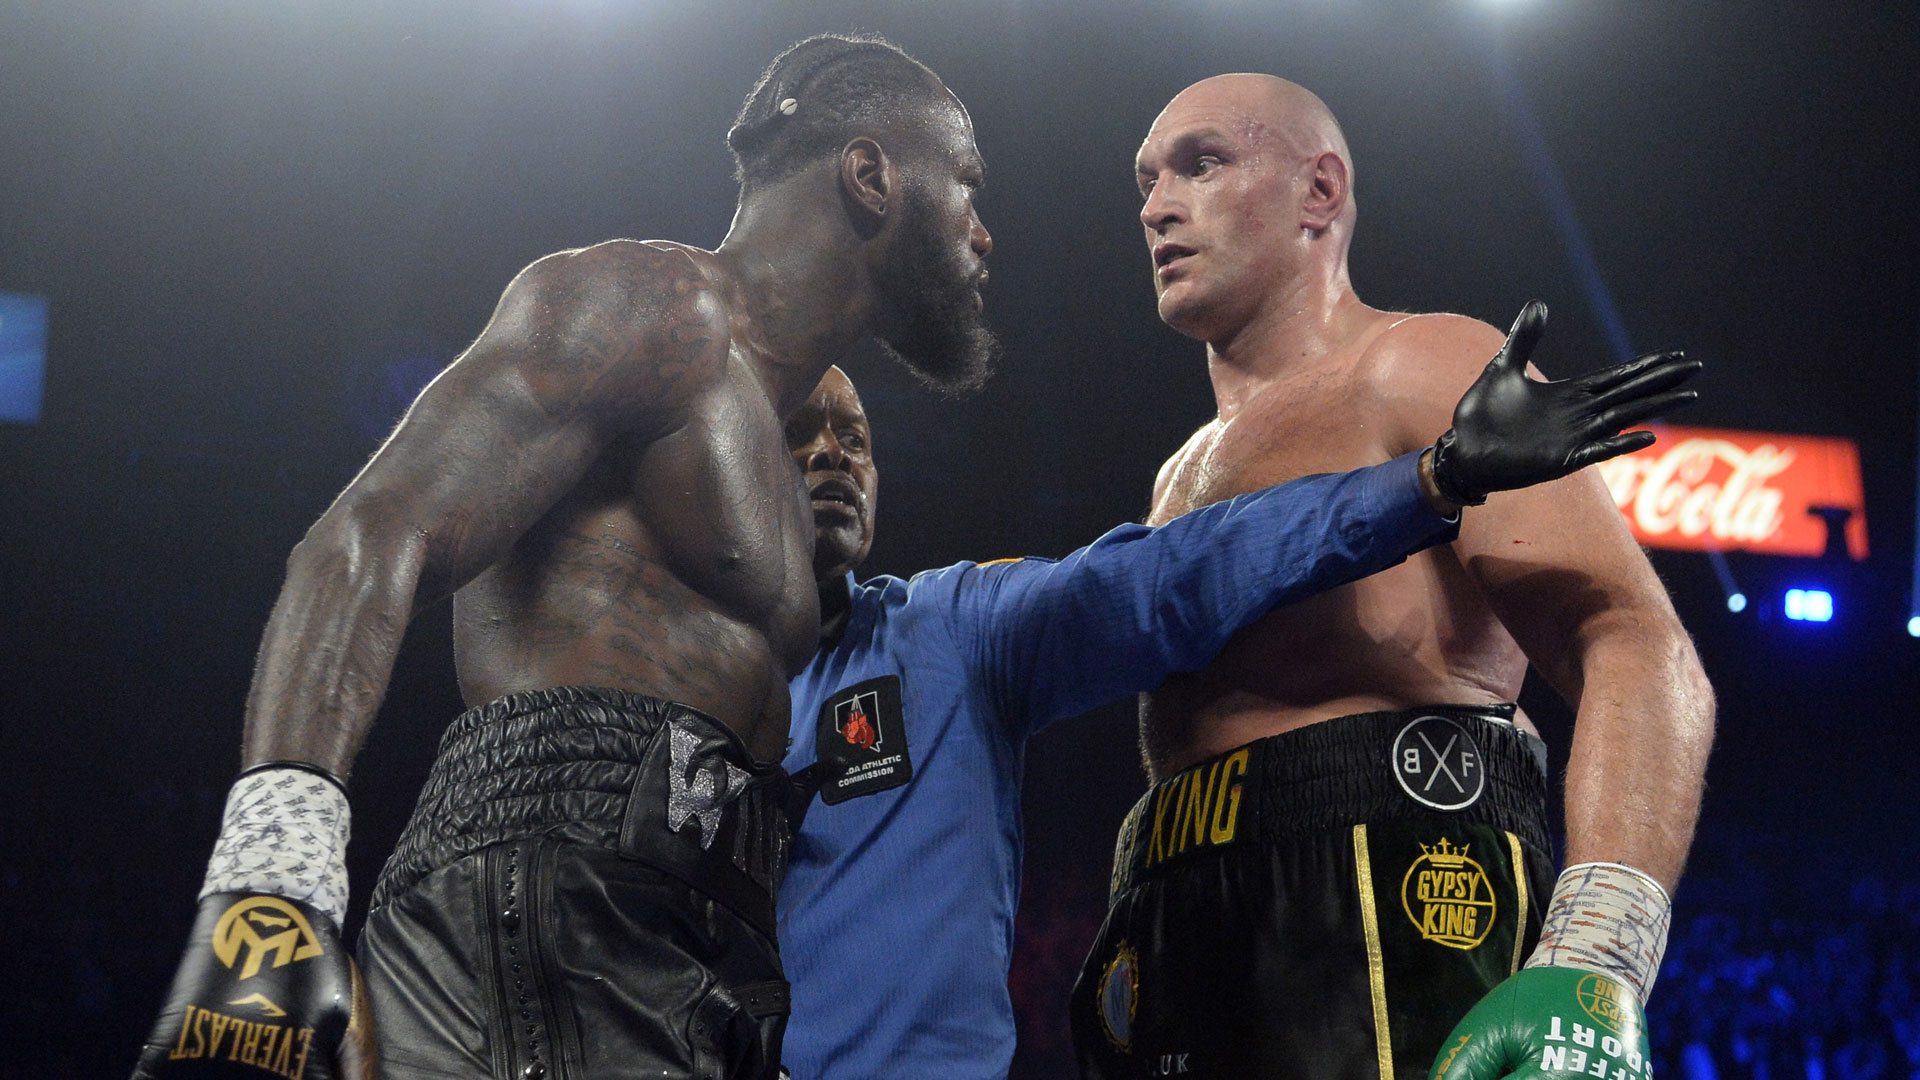 Tyson Fury vs Deontay Wilder 3, Fight viewing guide, Odds analysis, RSN coverage, 1920x1080 Full HD Desktop